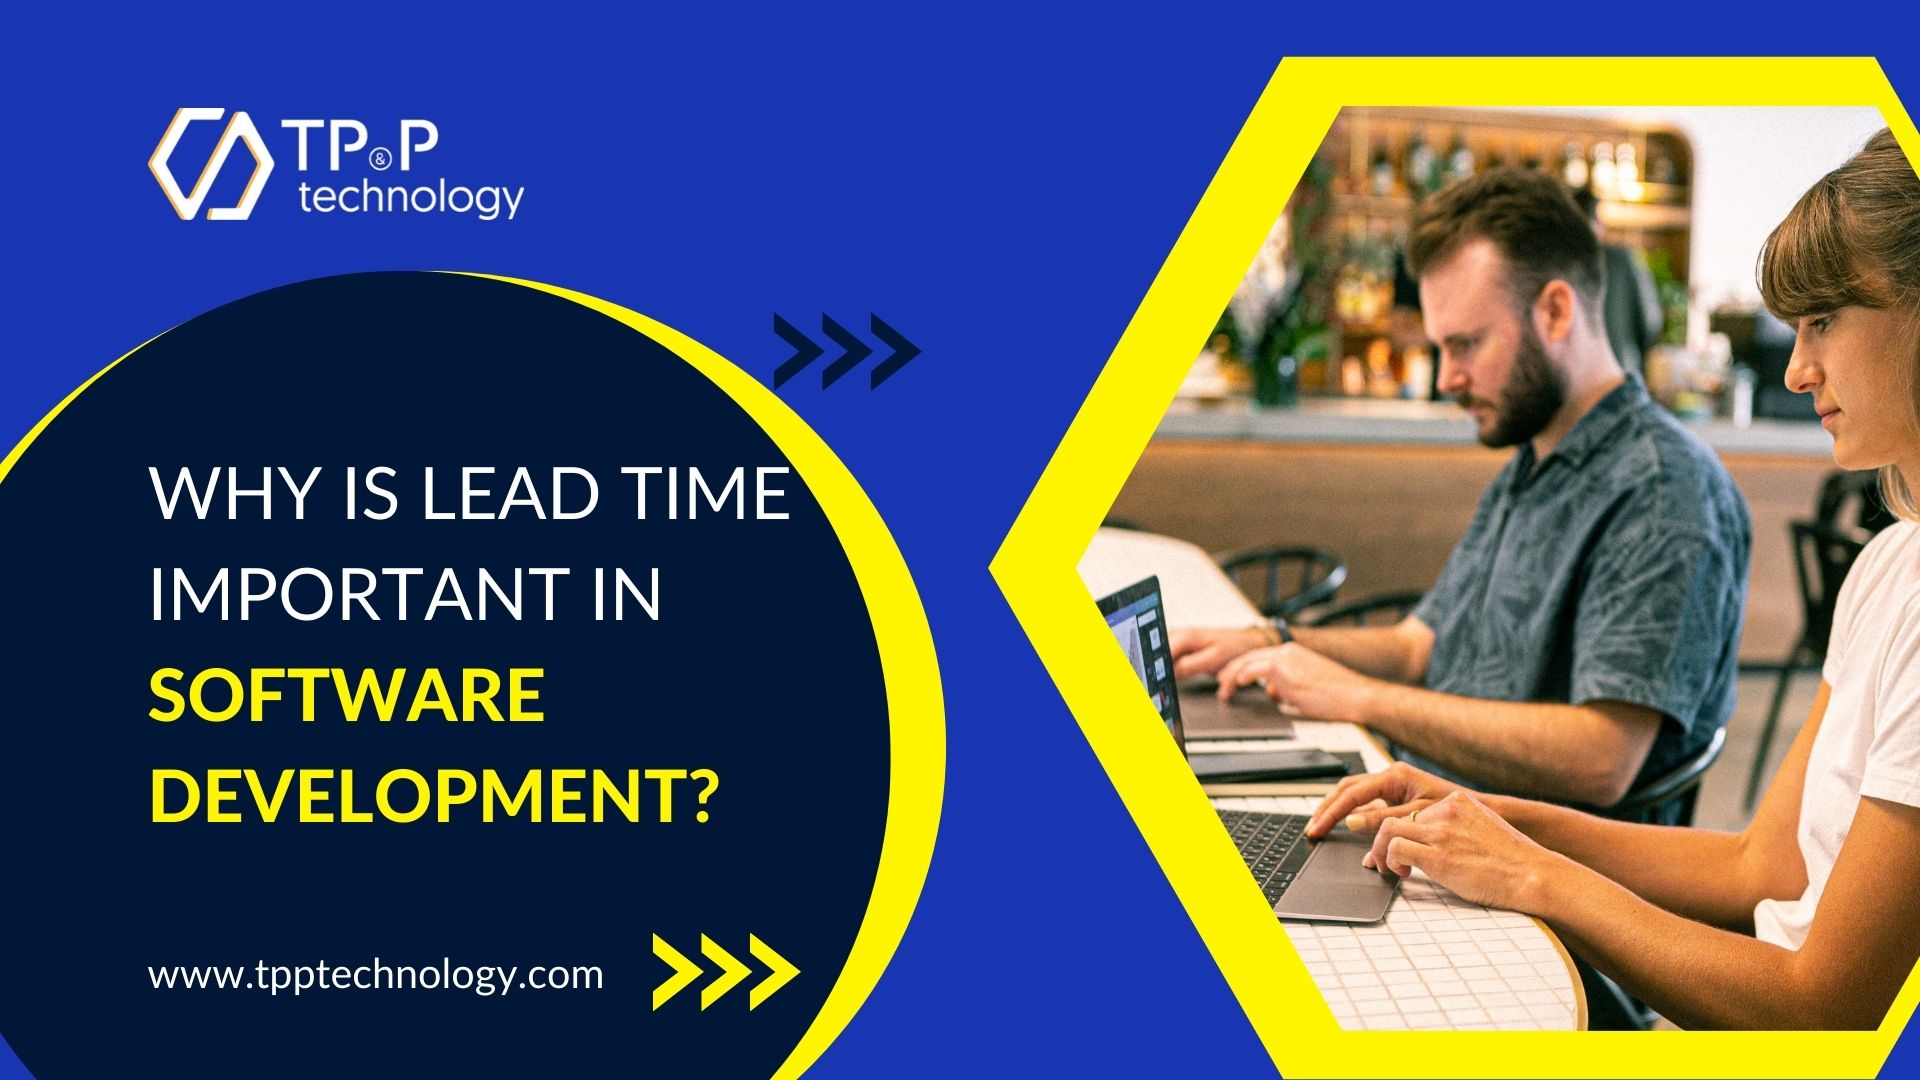 Why Is Lead Time Important In Software Development?